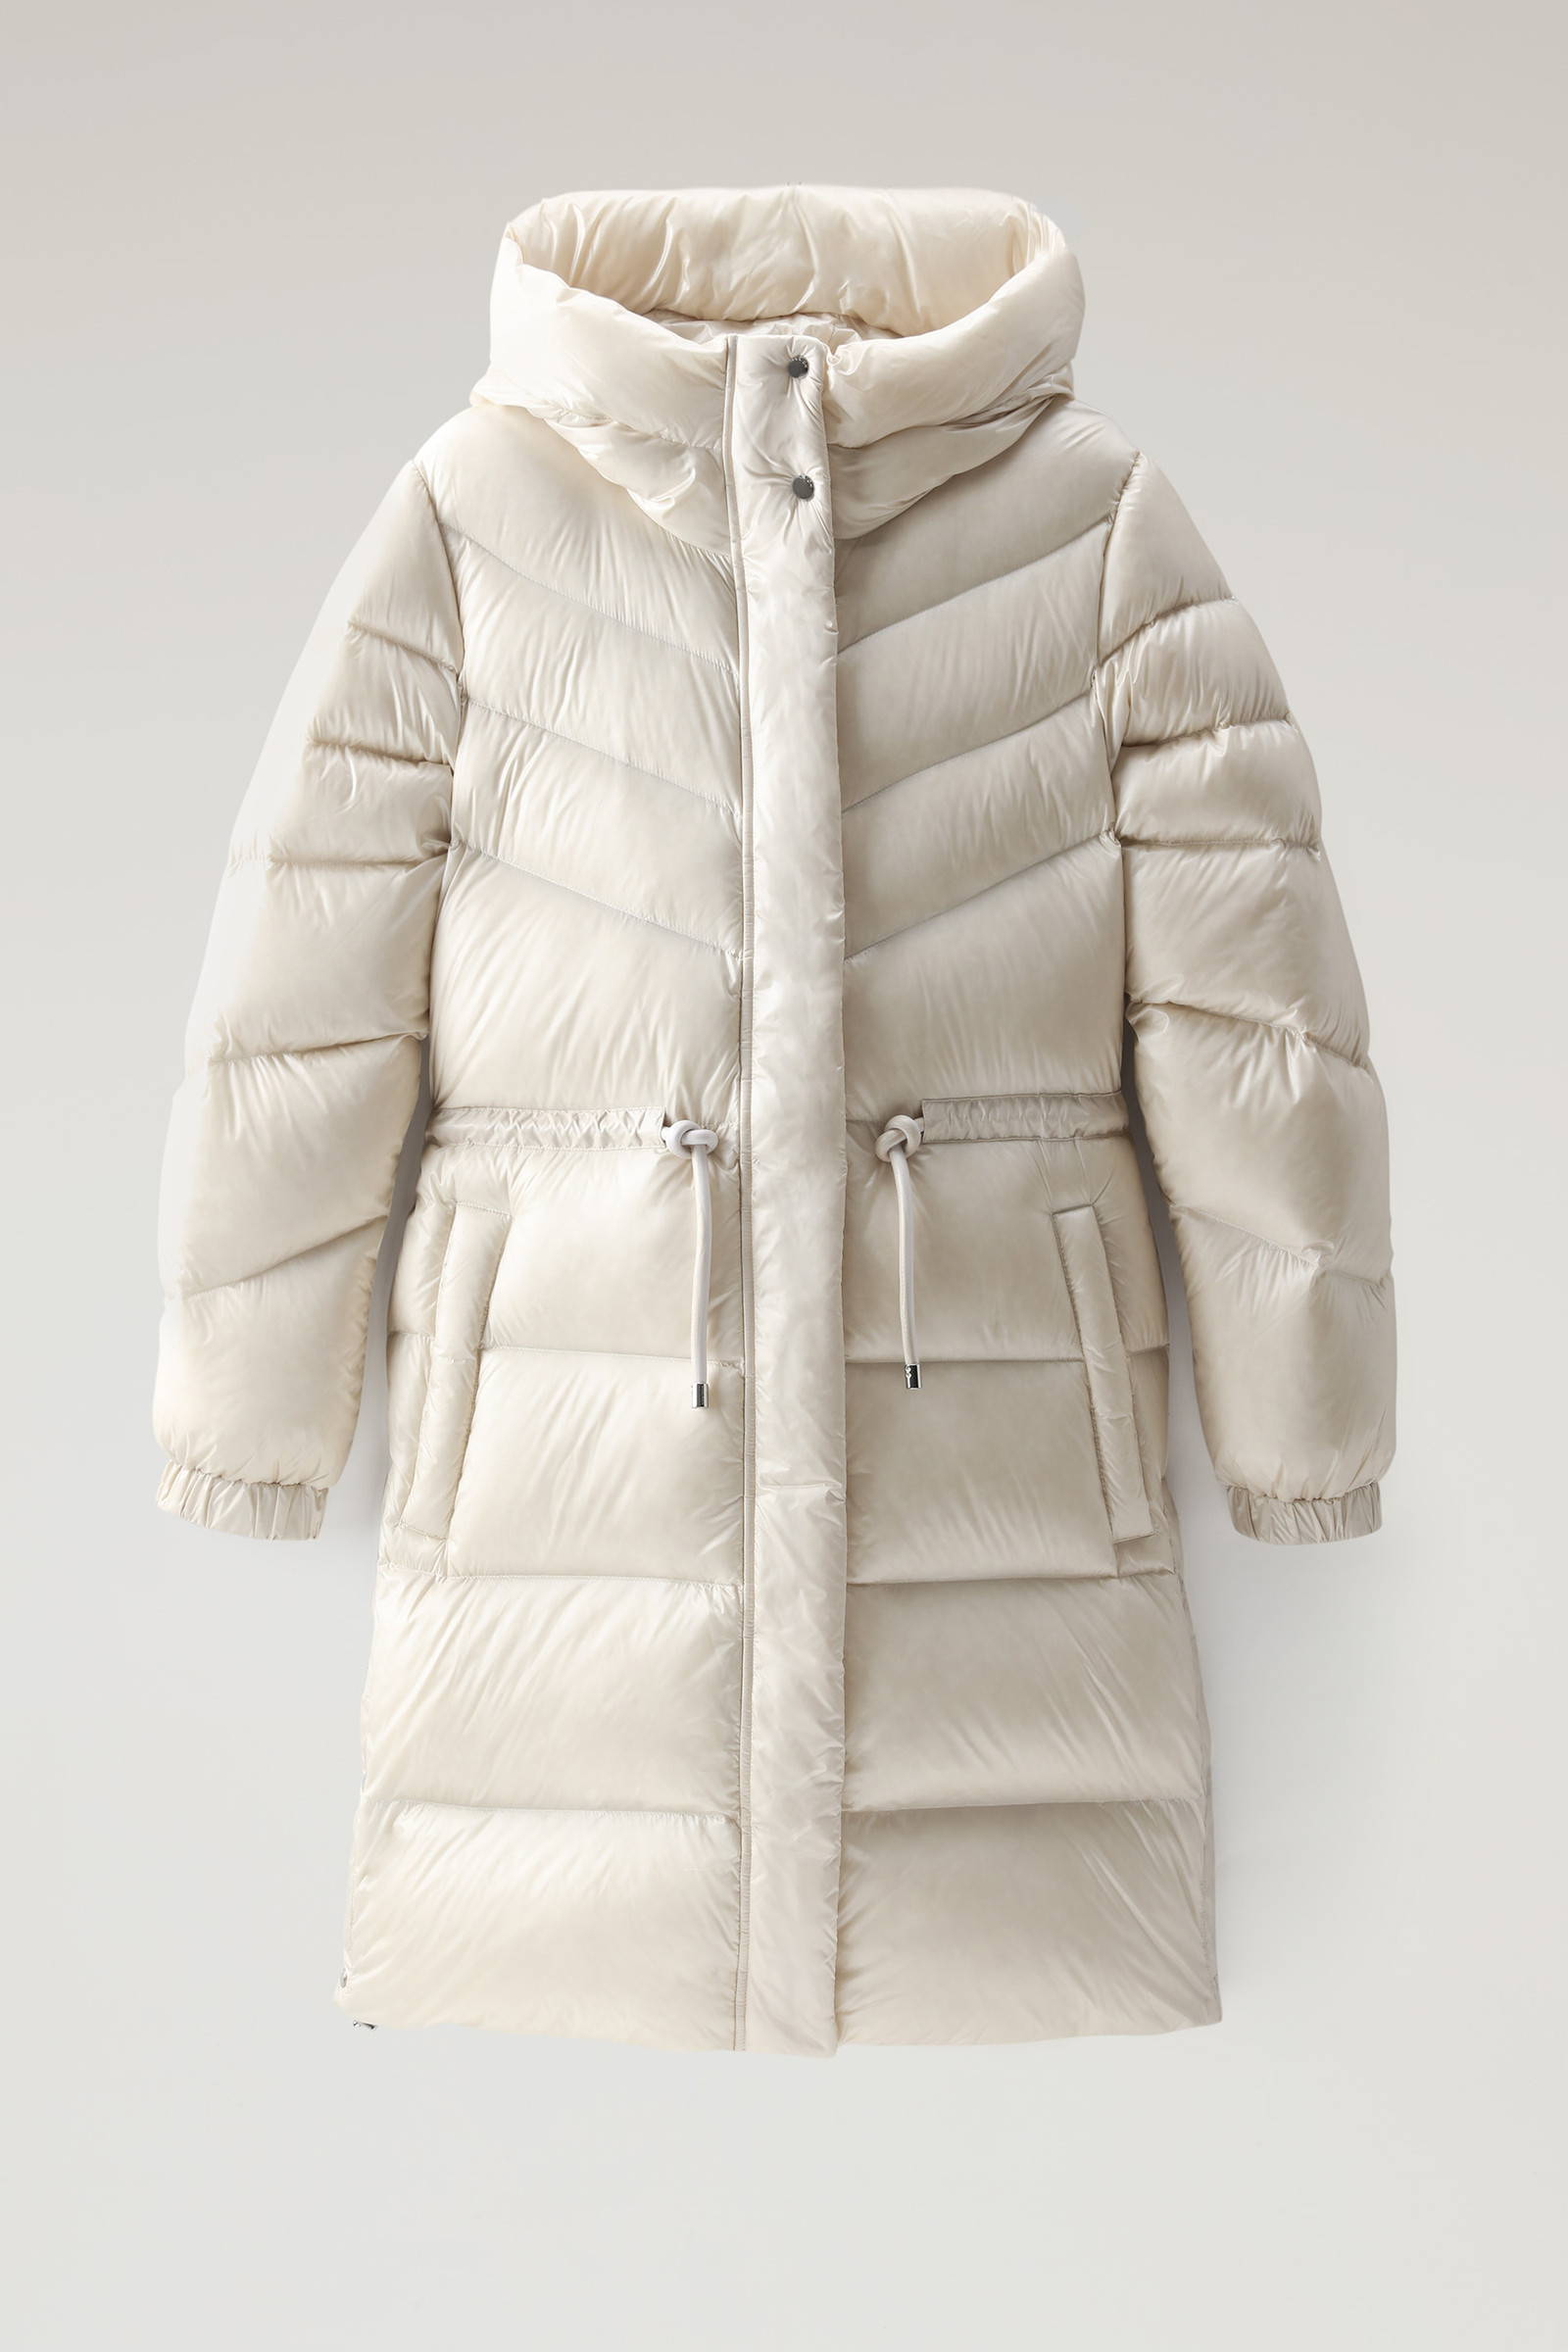 Aliquippa Silky Long Down Jacket with a Drawstring Waist - Women - White